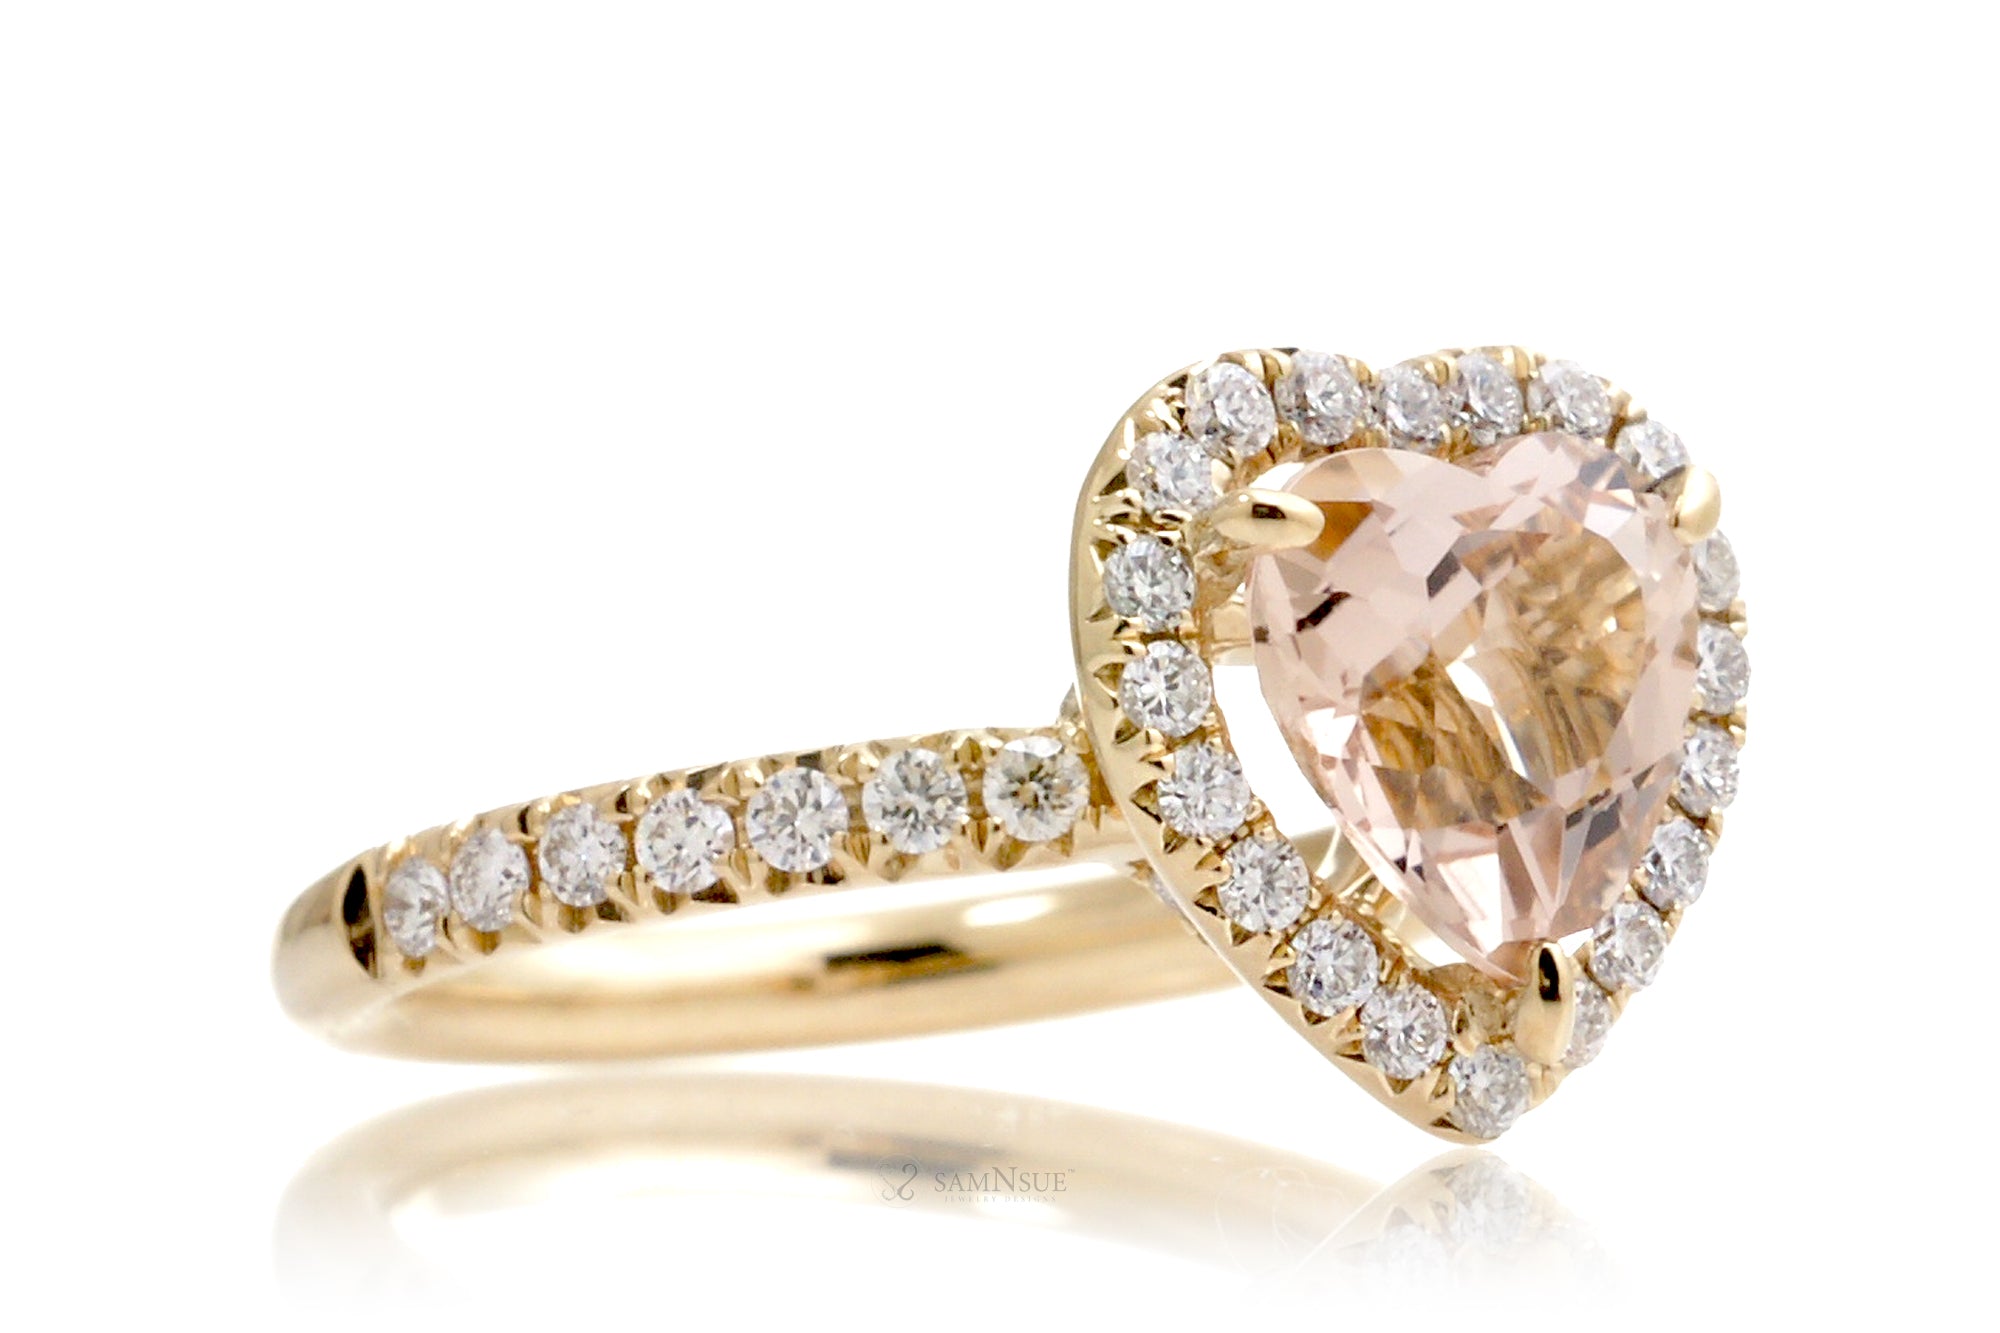 The Drenched Heart Morganite